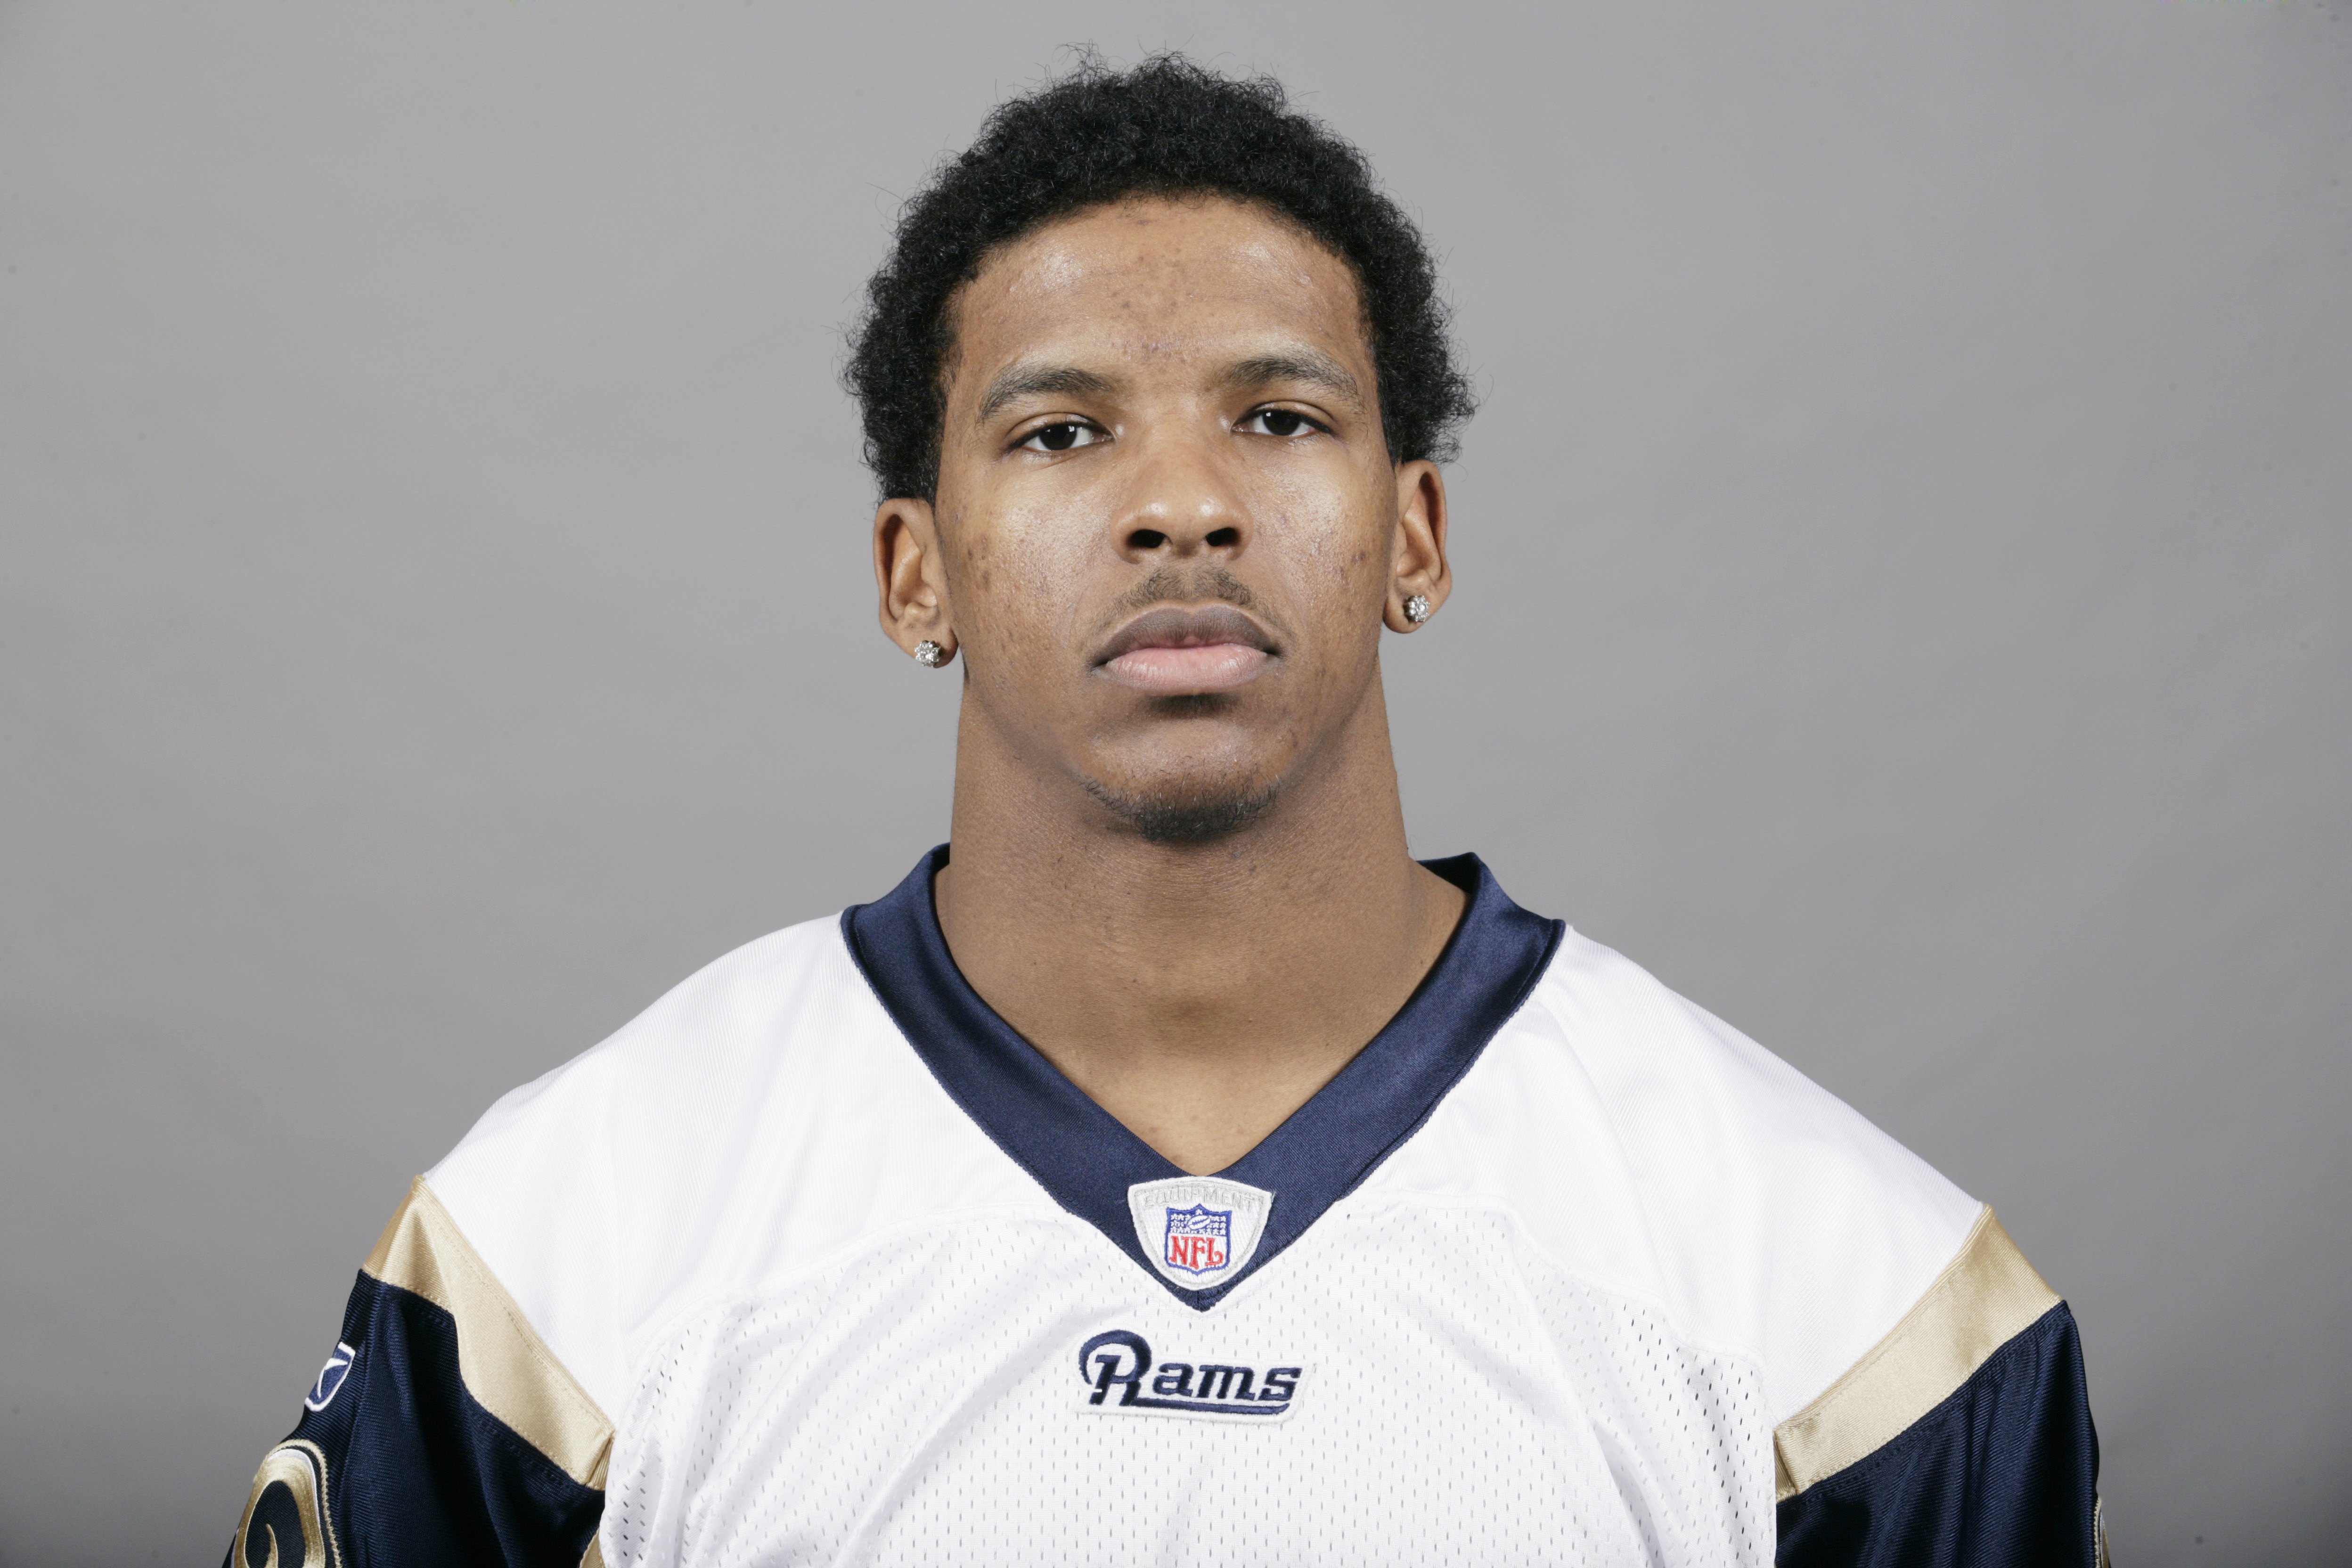 ST. LOUIS - 2009:  Justin King of the St. Louis Rams poses for his 2009 NFL headshot at photo day in St. Louis, Missouri.  (Photo by NFL Photos)